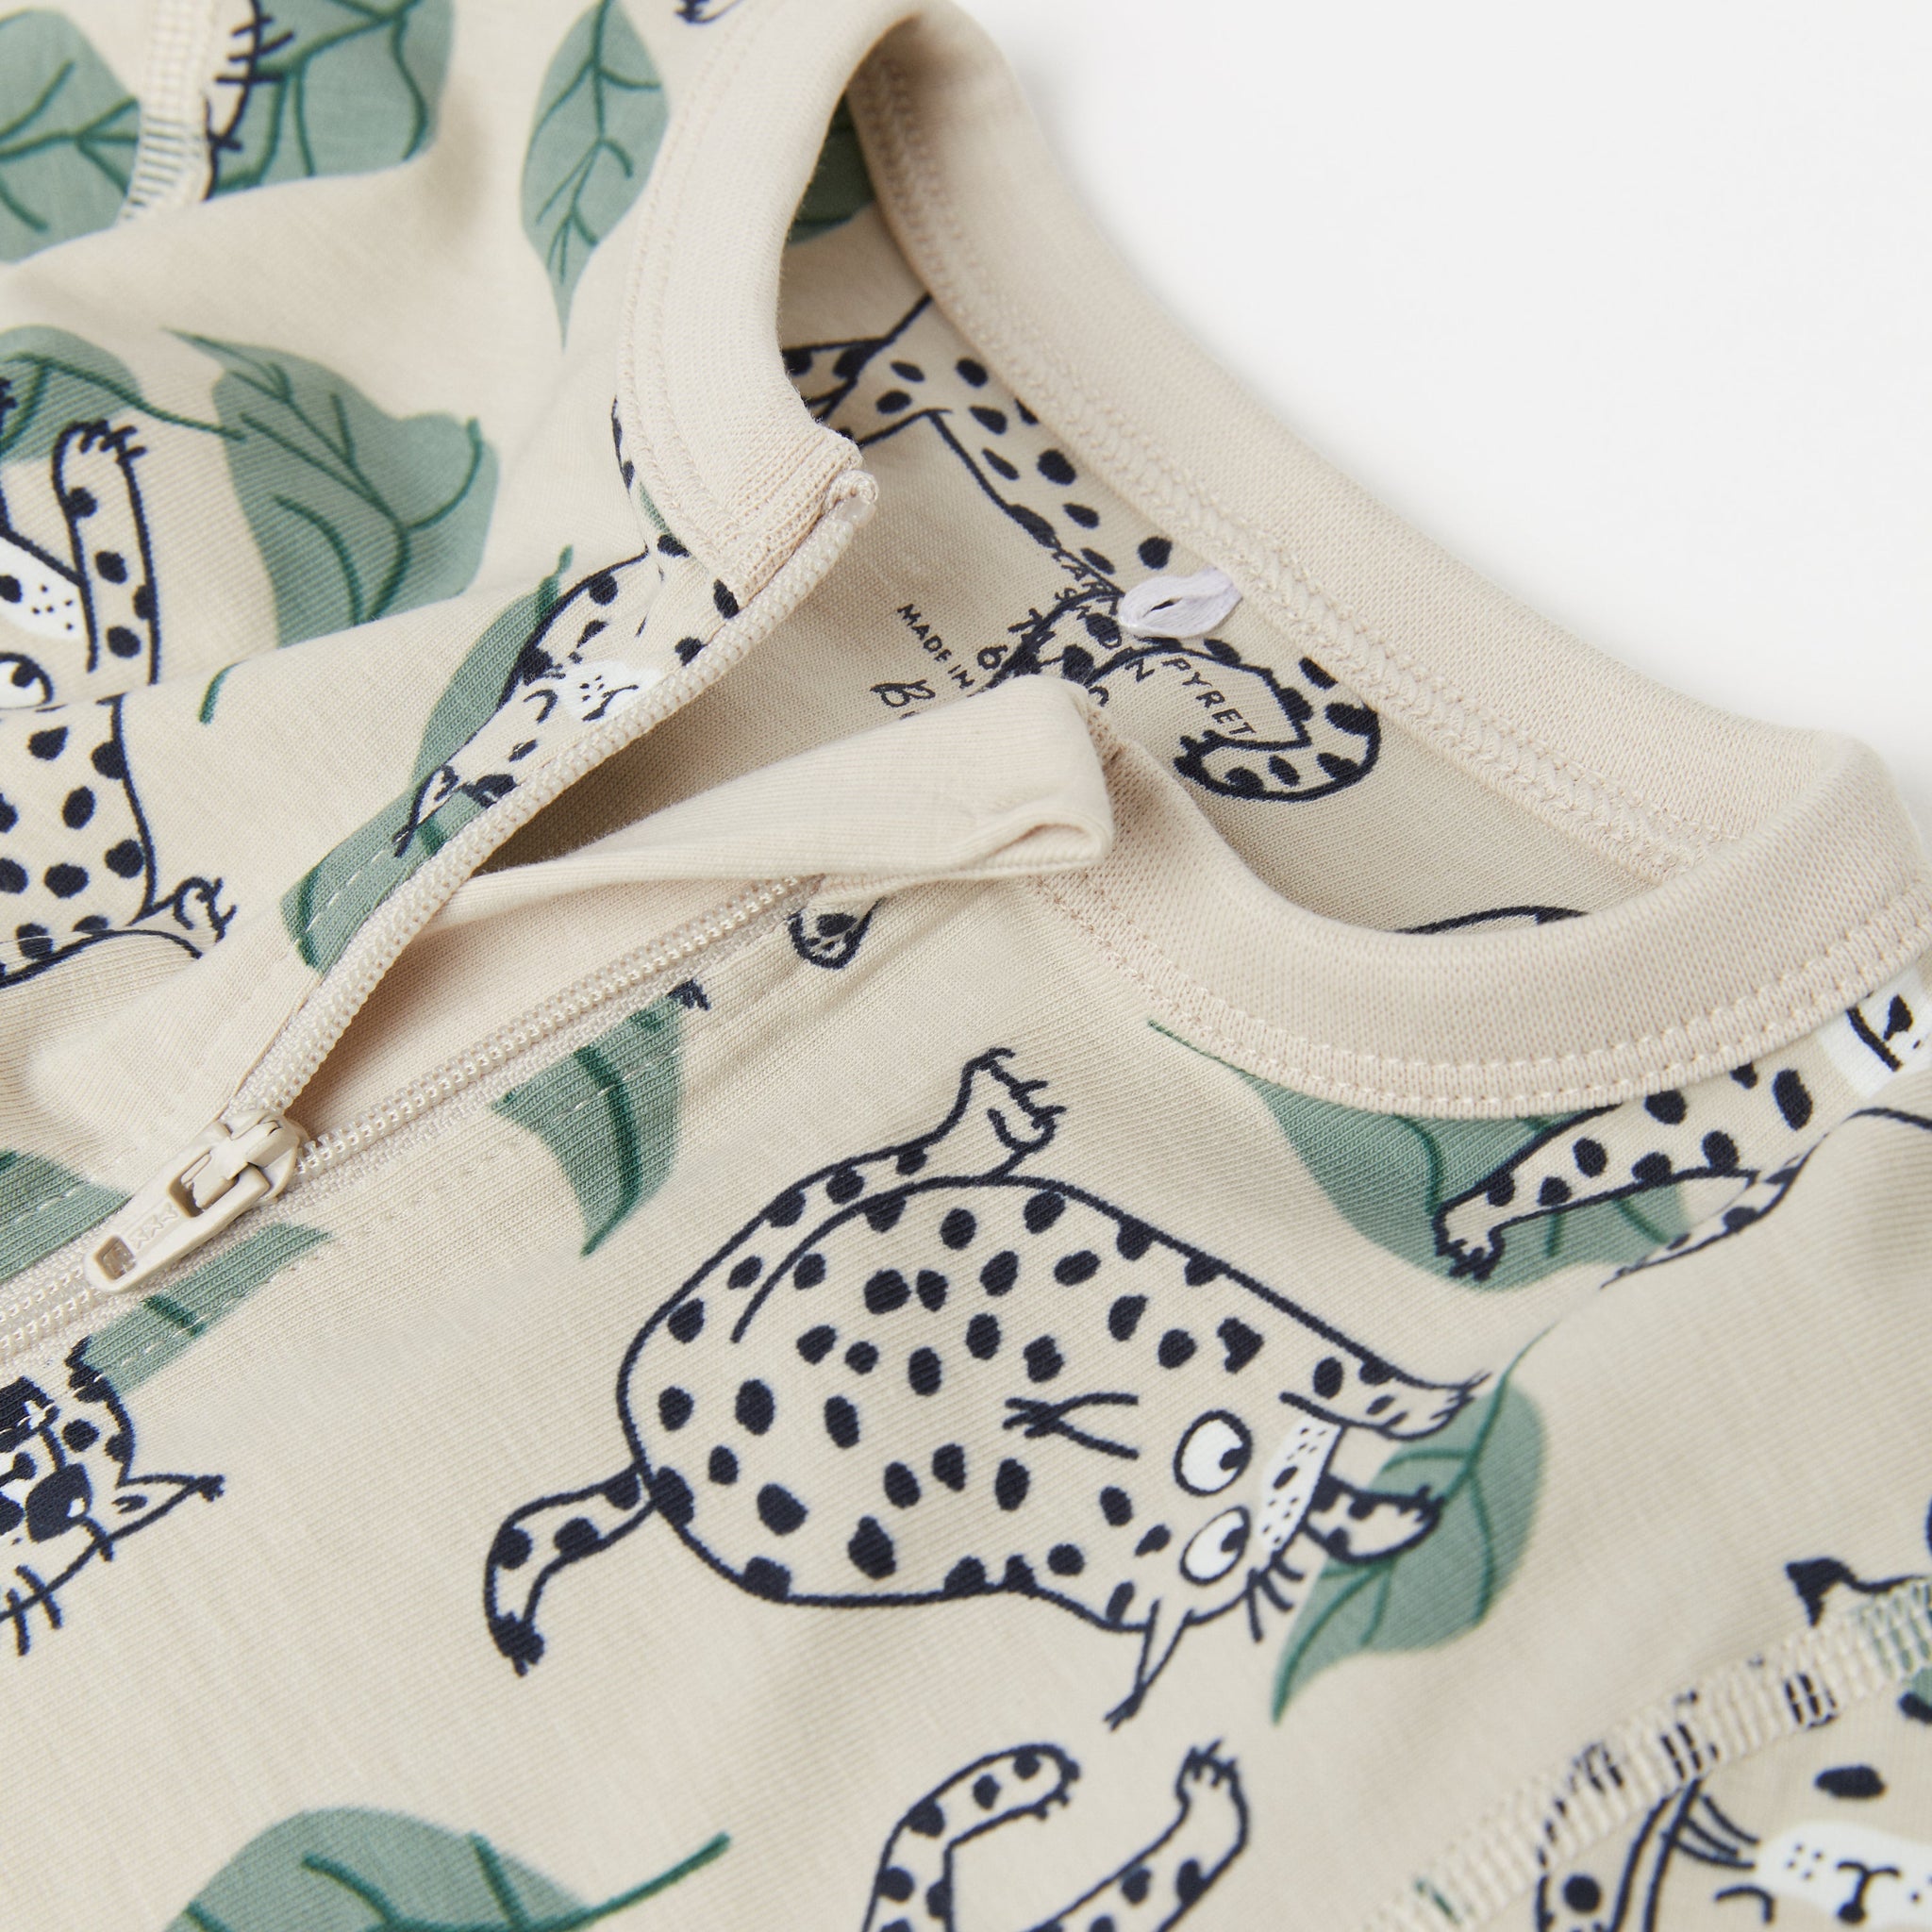 Big Cat Beige Baby Sleepsuit from the Polarn O. Pyret Kidswear collection. The best ethical kids clothes